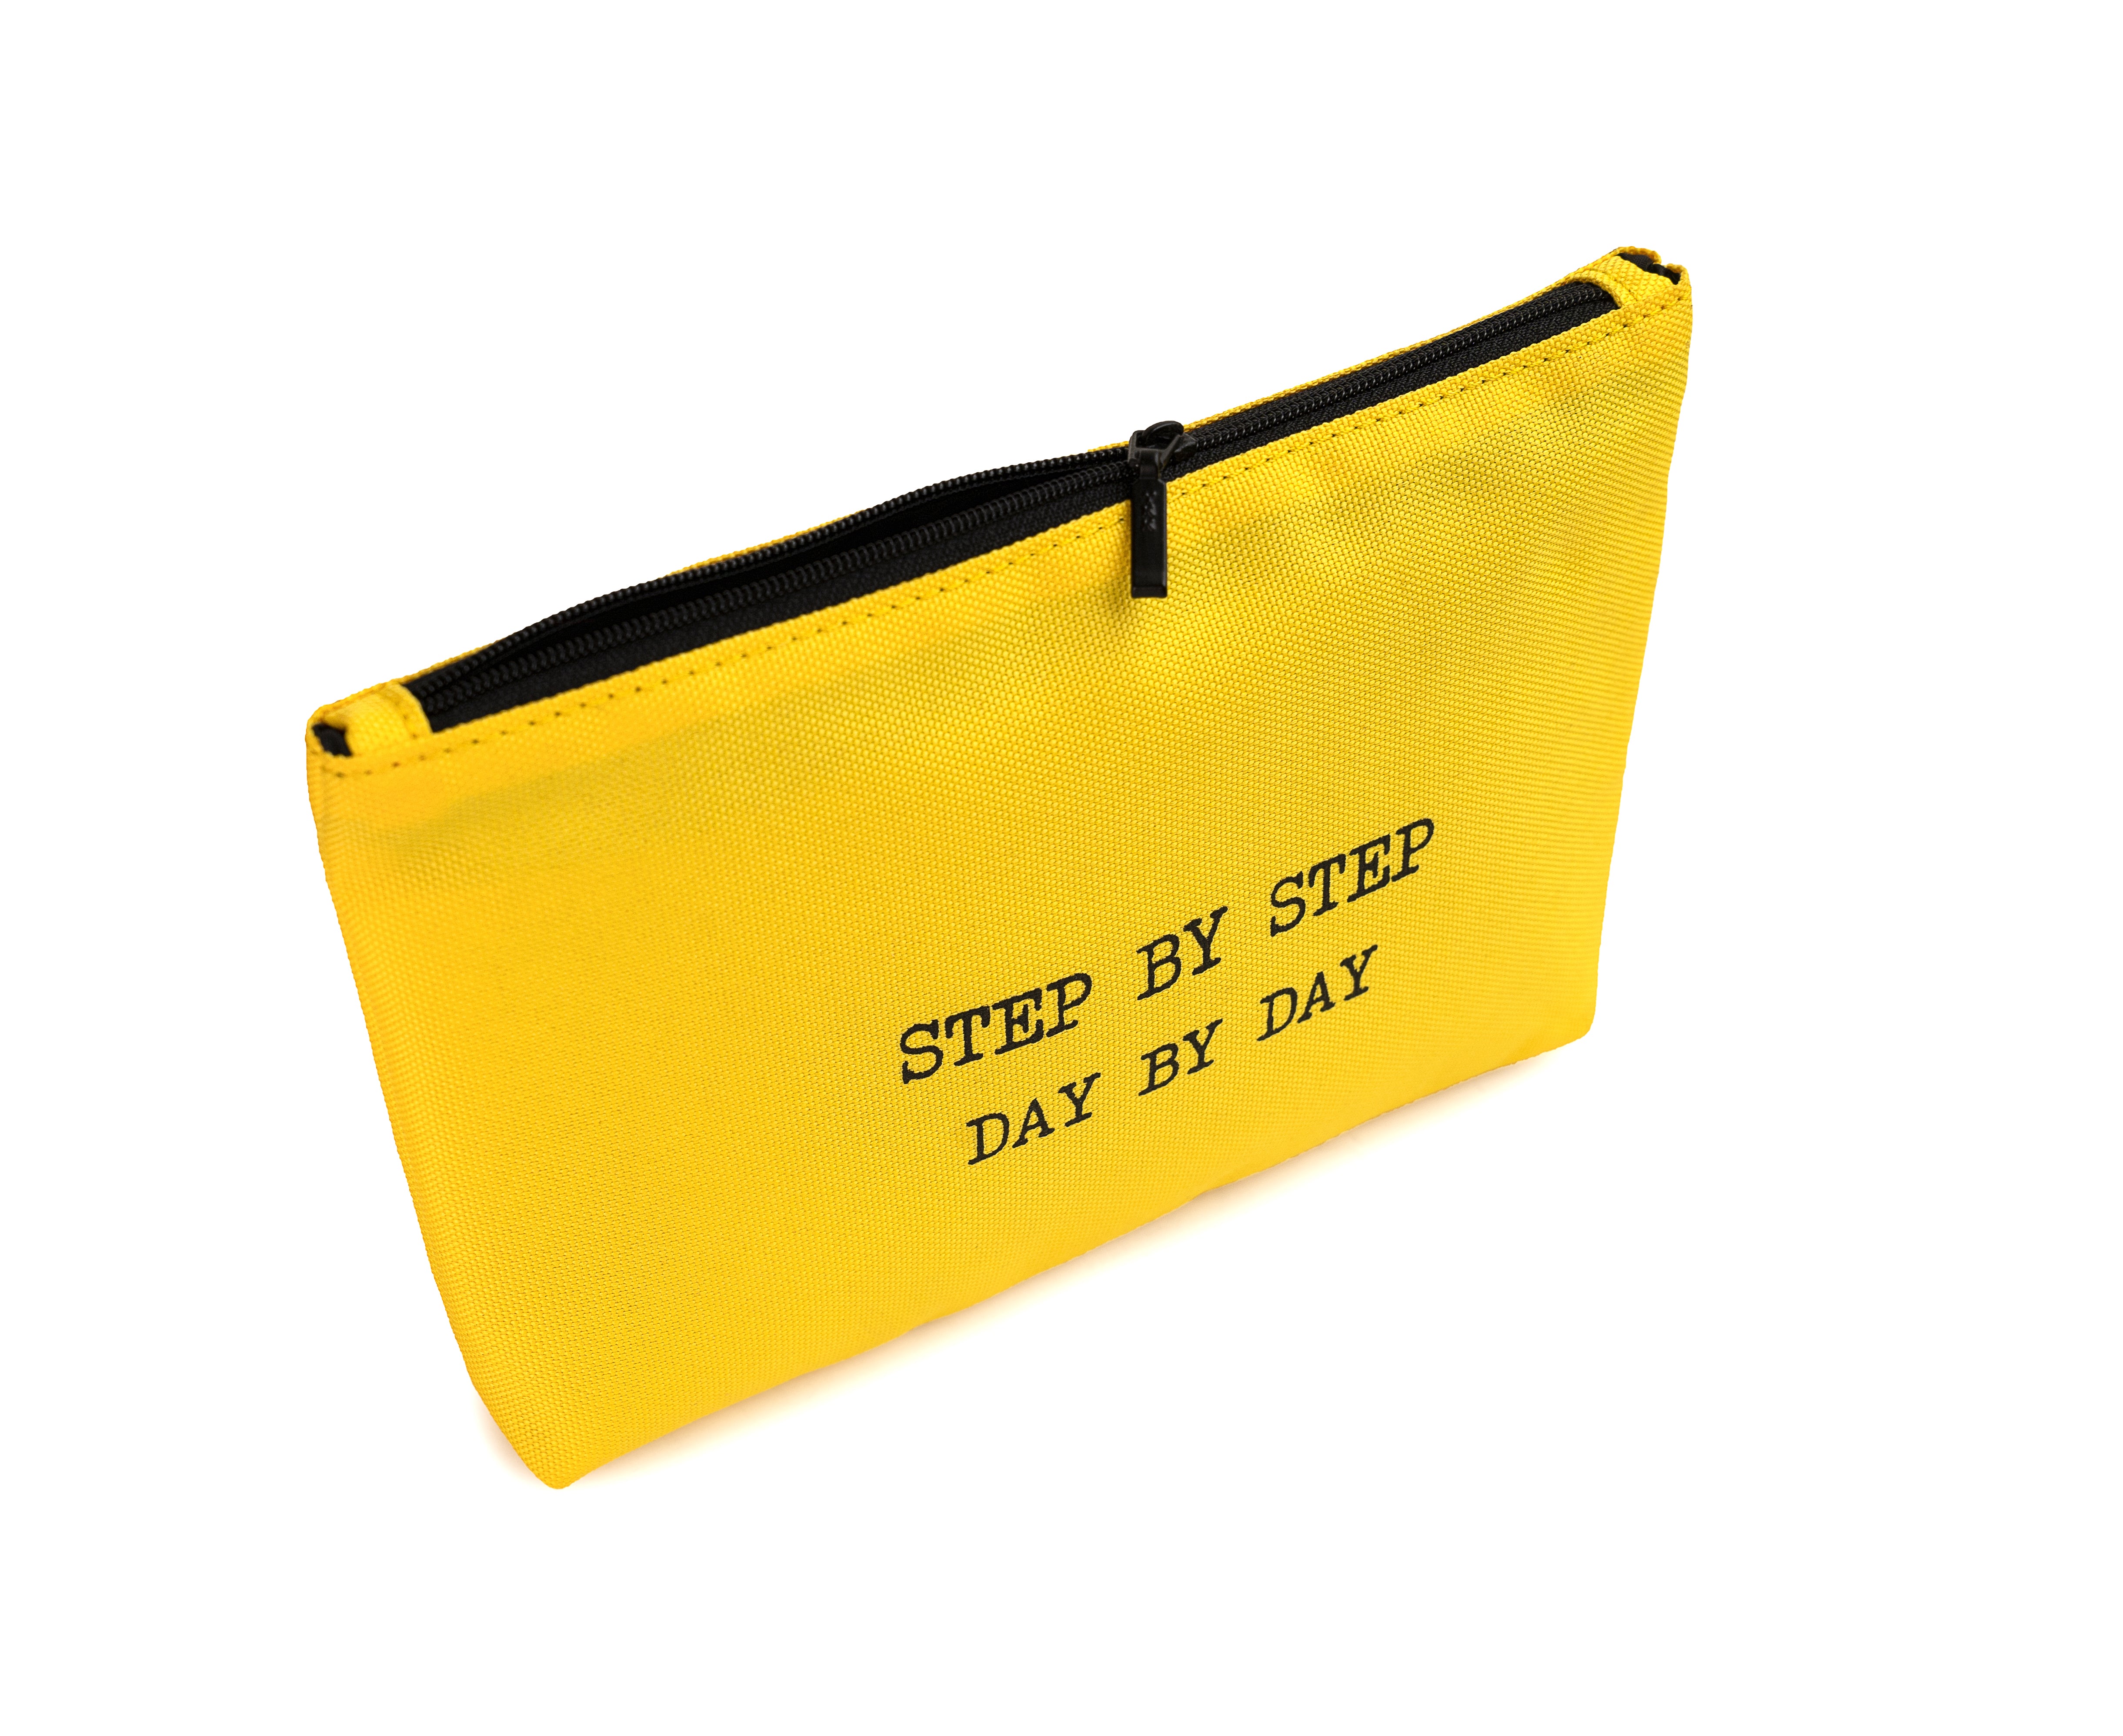 STEP BY STEP Yellow Pouch